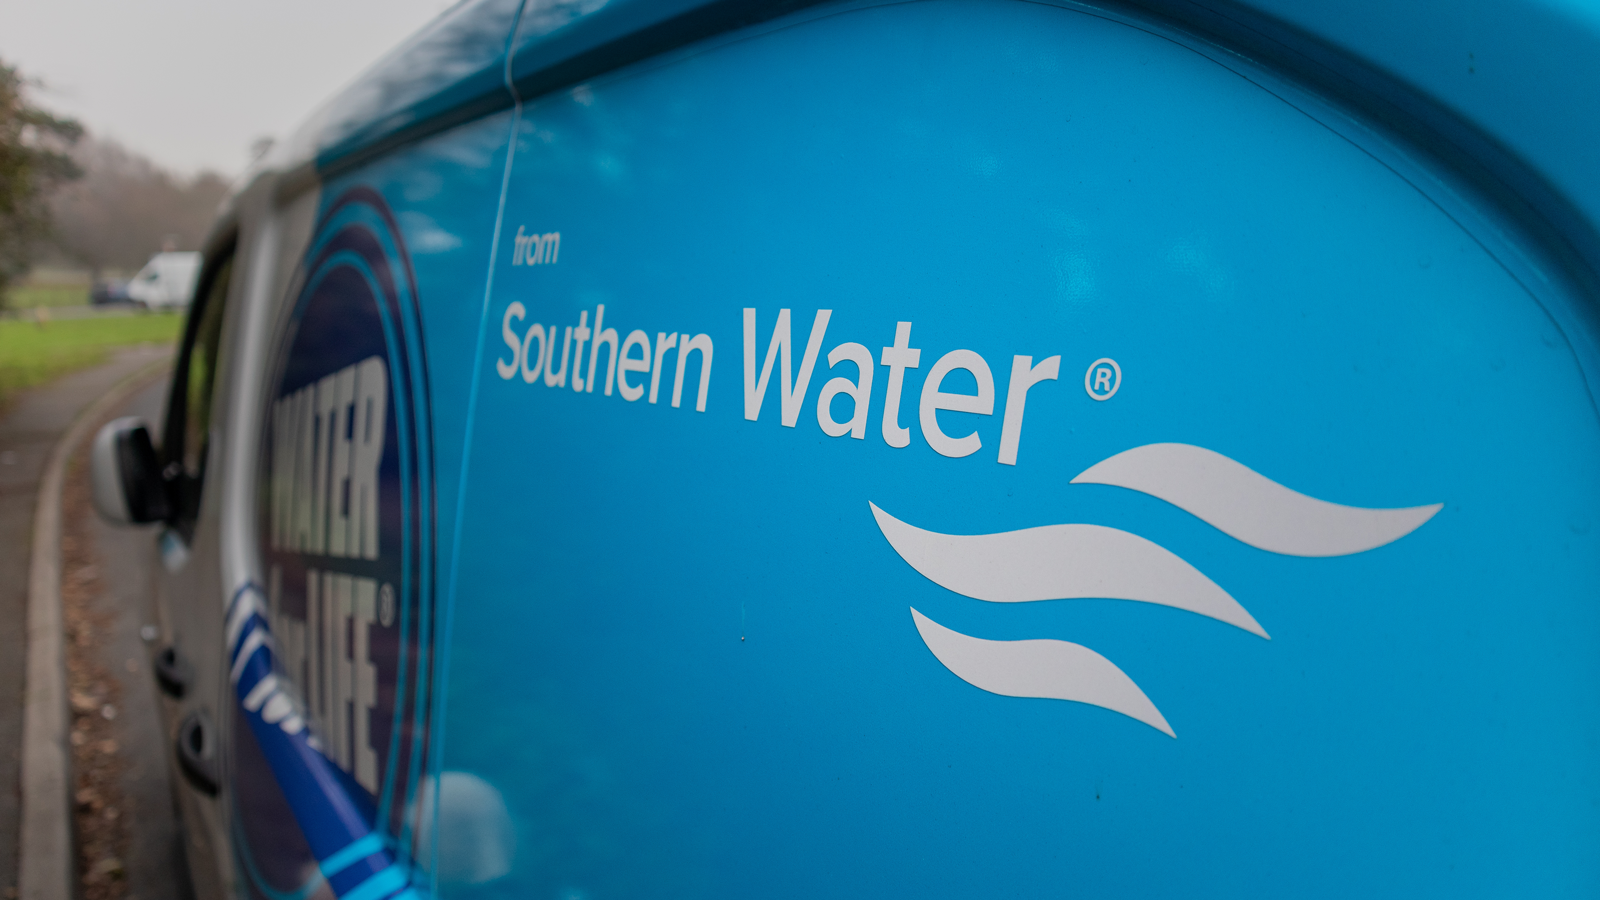 Southern Water admits data breach may impact nearly half a million customers